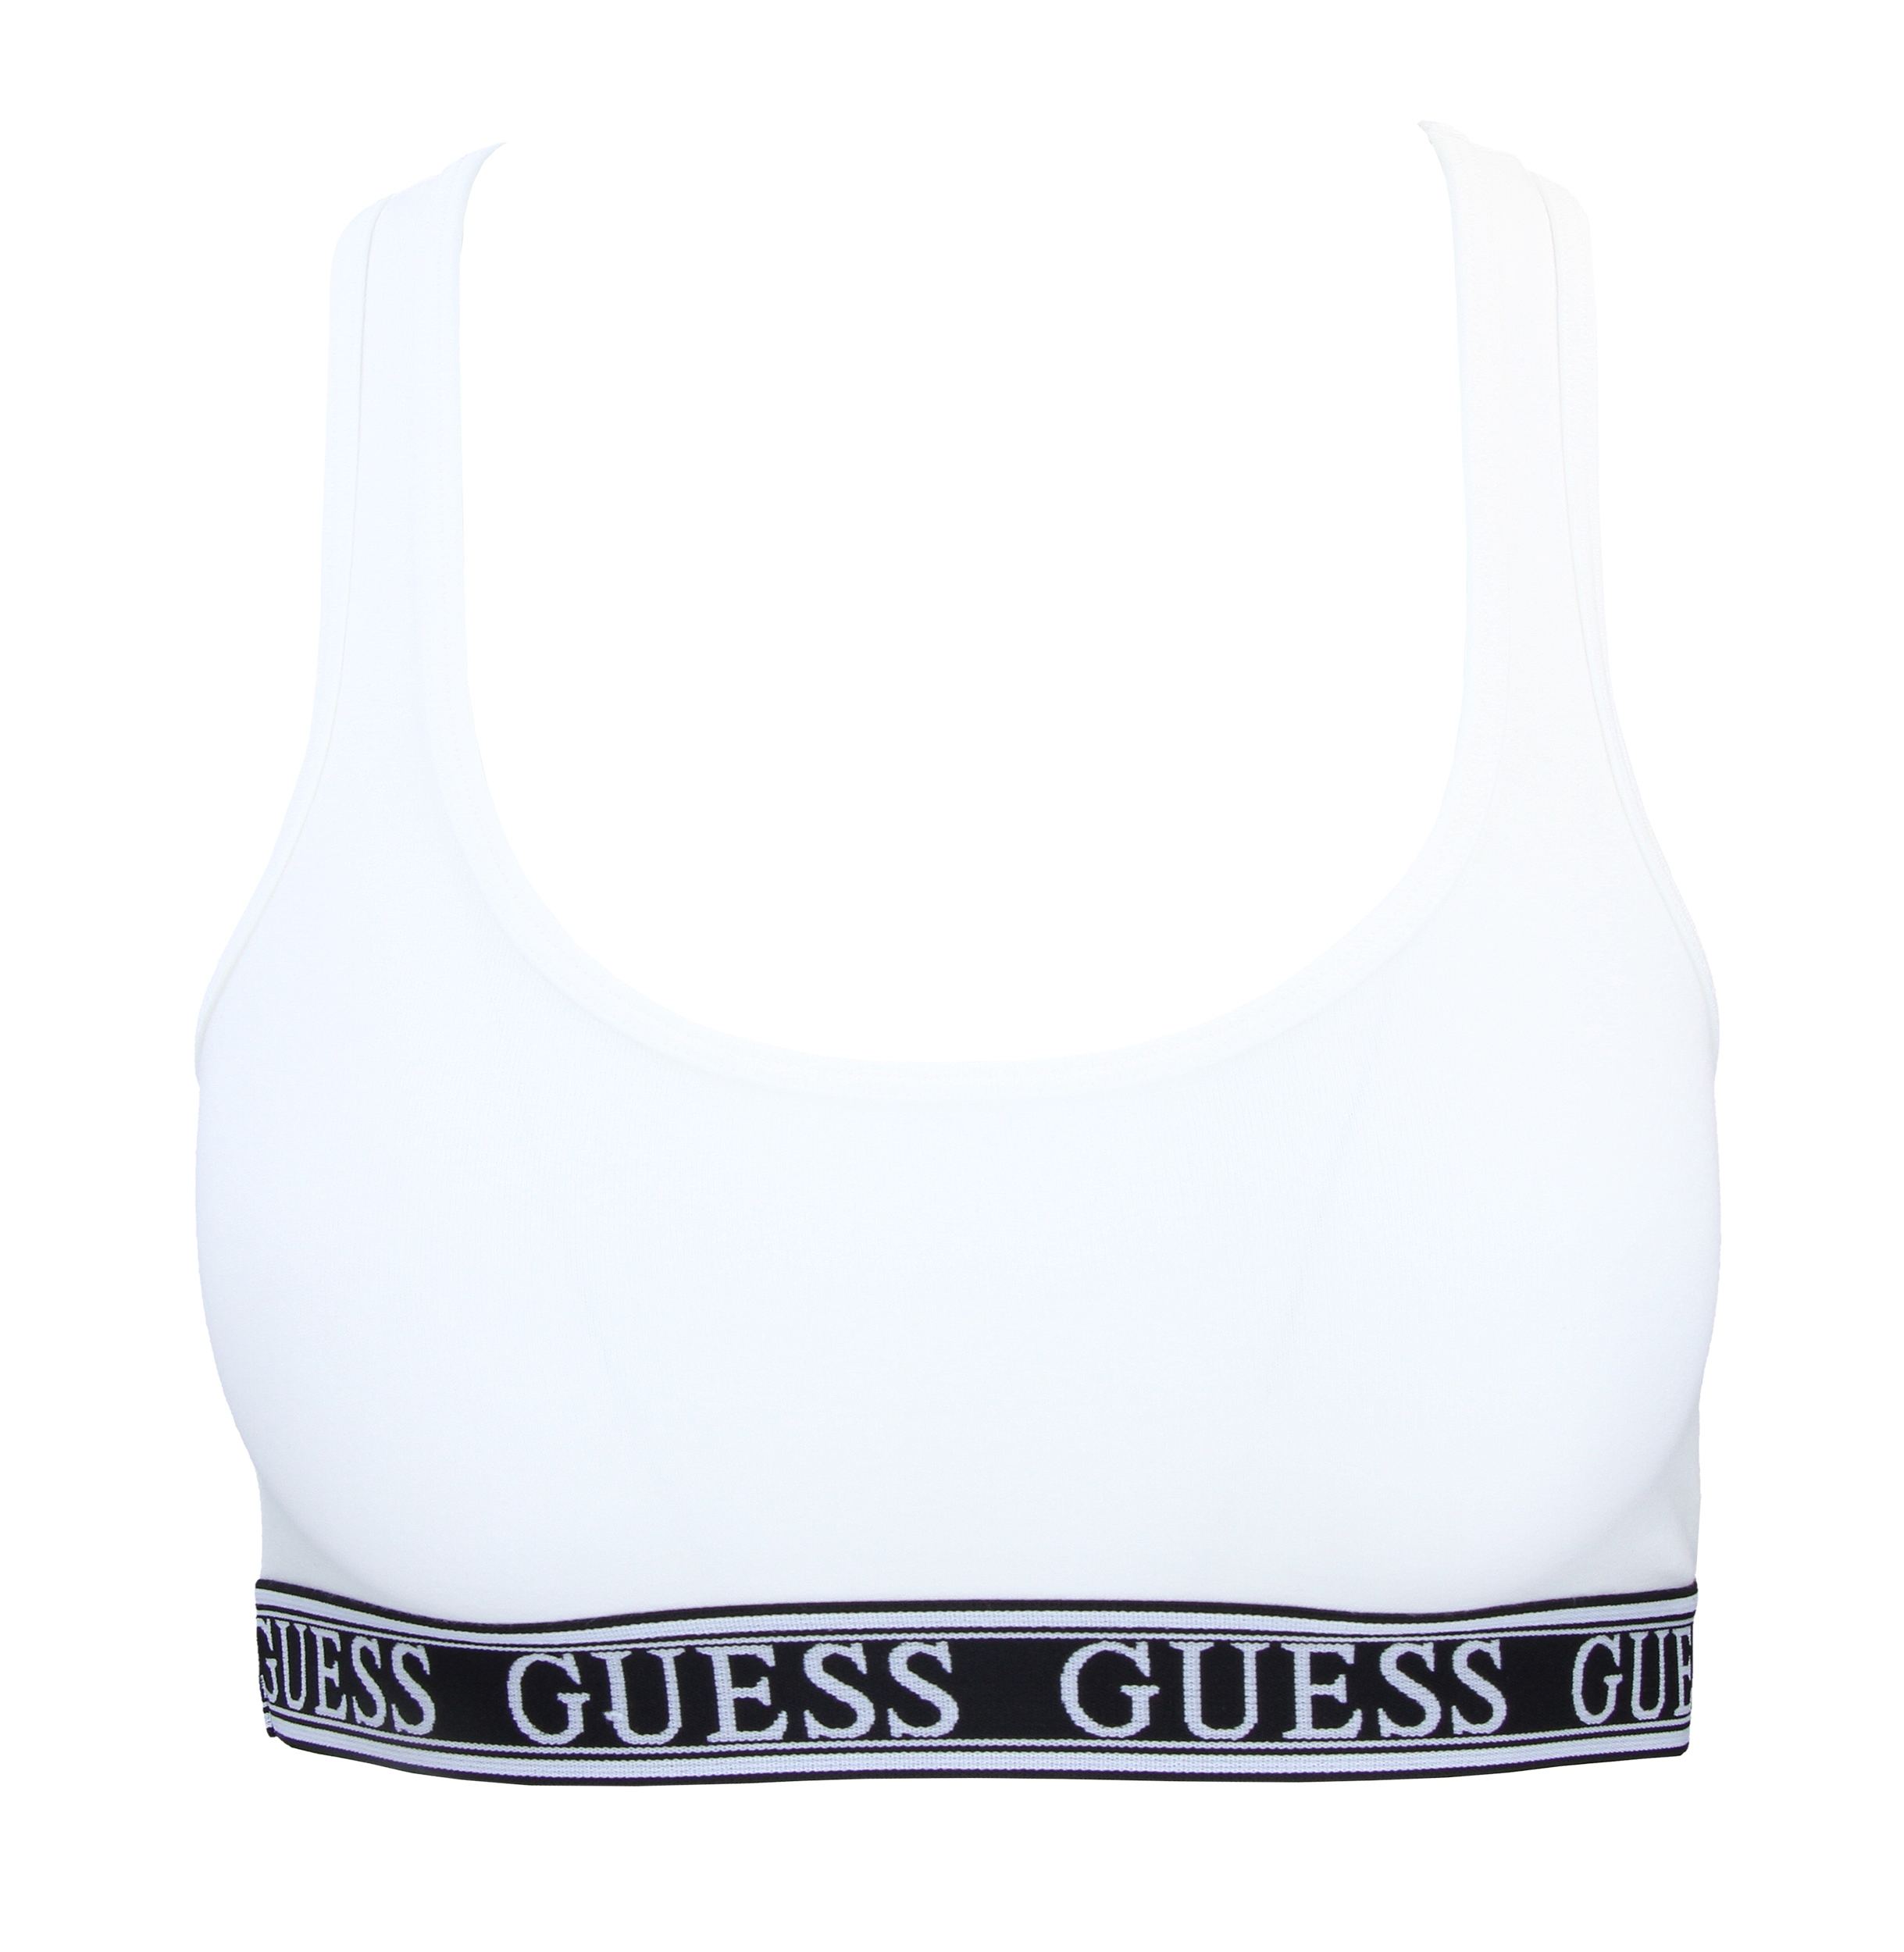 GUESS ANGELICA ACTIVE BRA